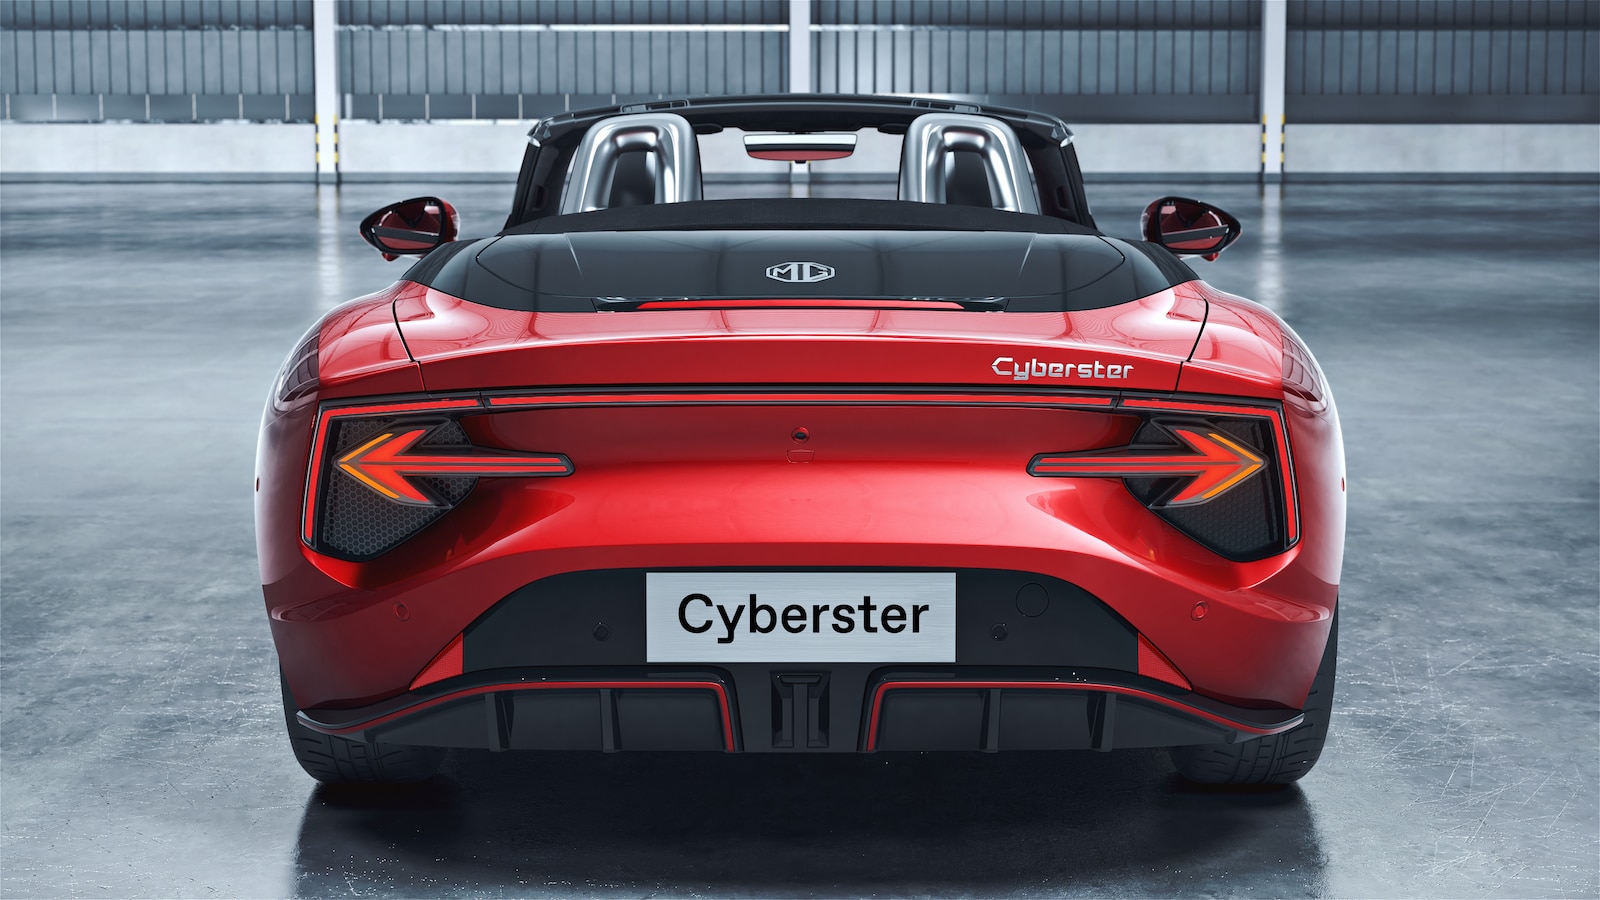 MG Cyberster Roadster Could Be First All-Electric Two-Seater In India?